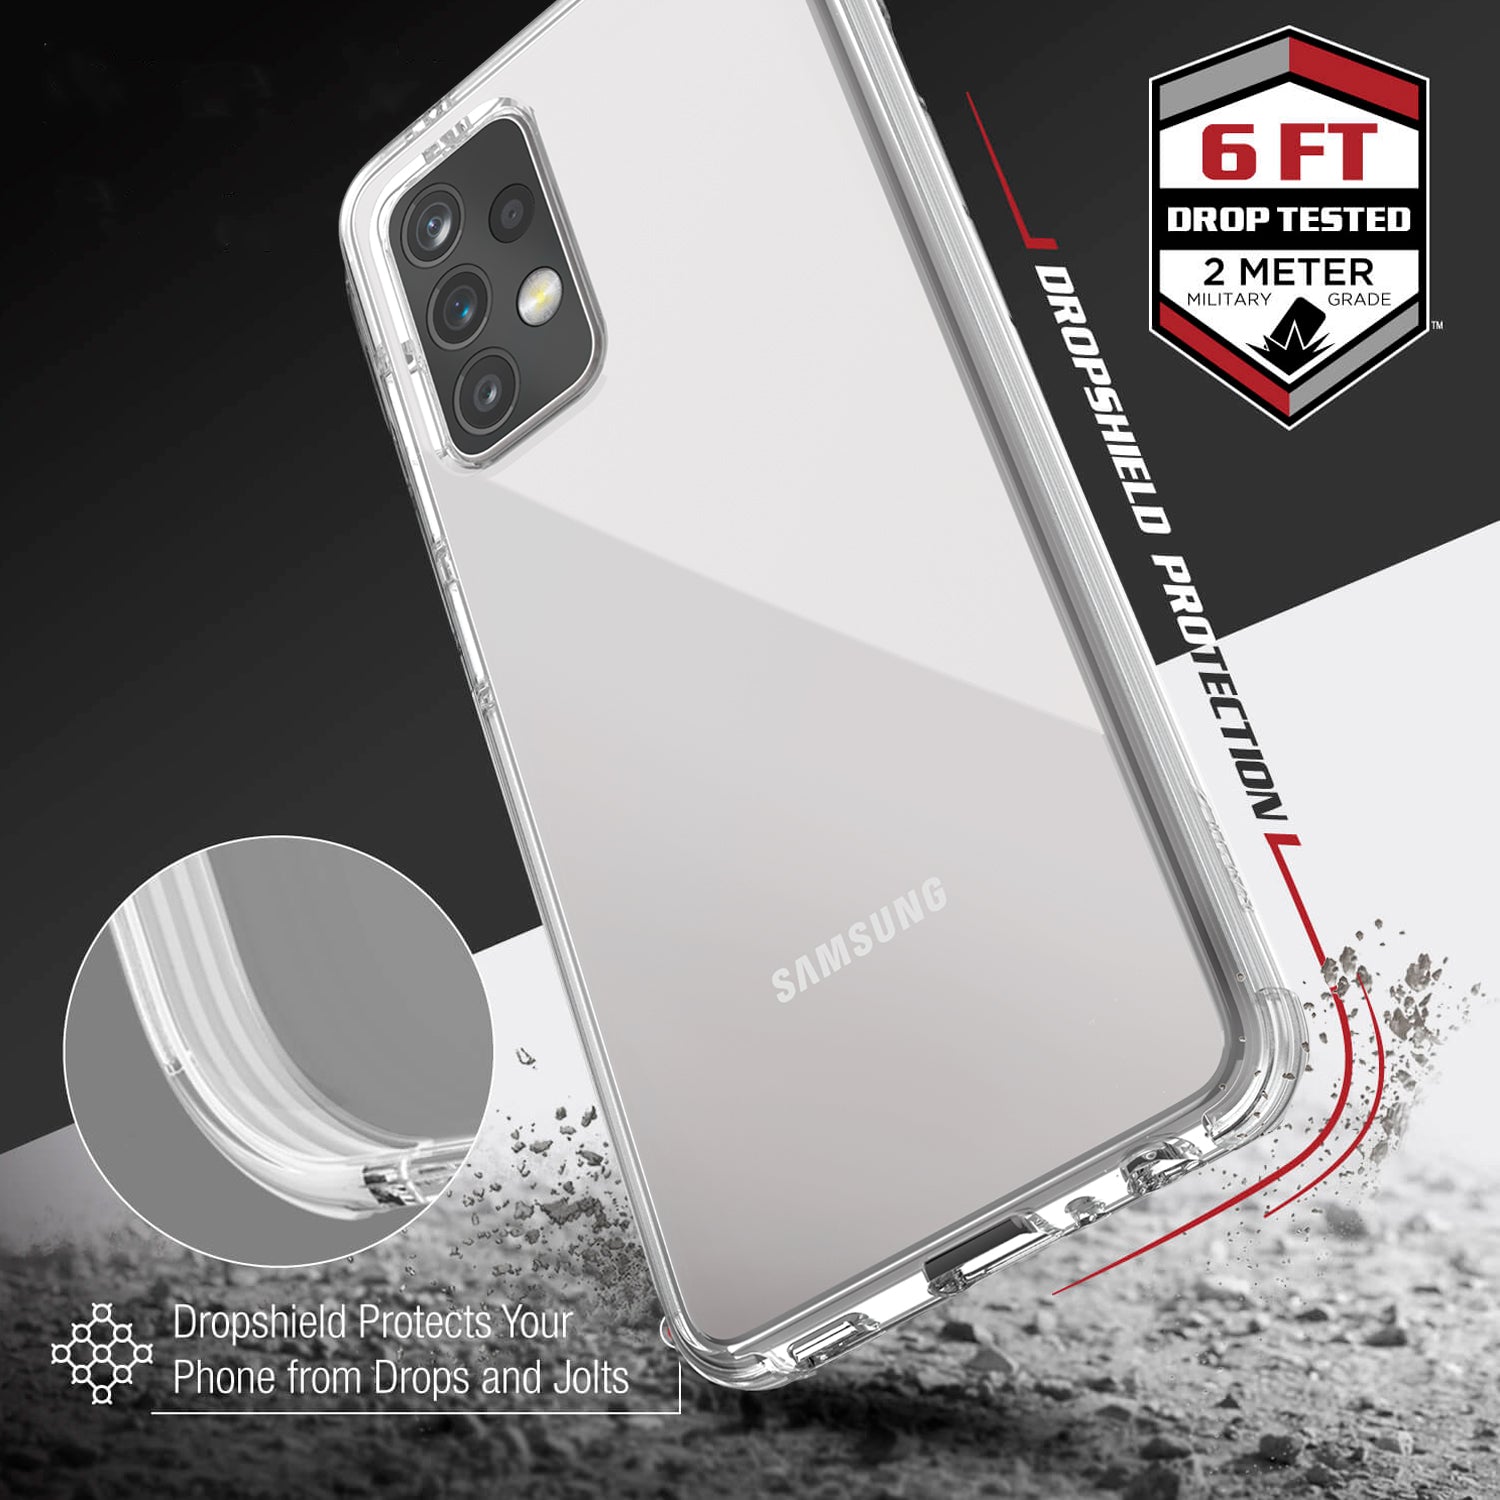 Showing a Samsung Galaxy A52 in a raptic clear case with dropshield protection up to 2 metres